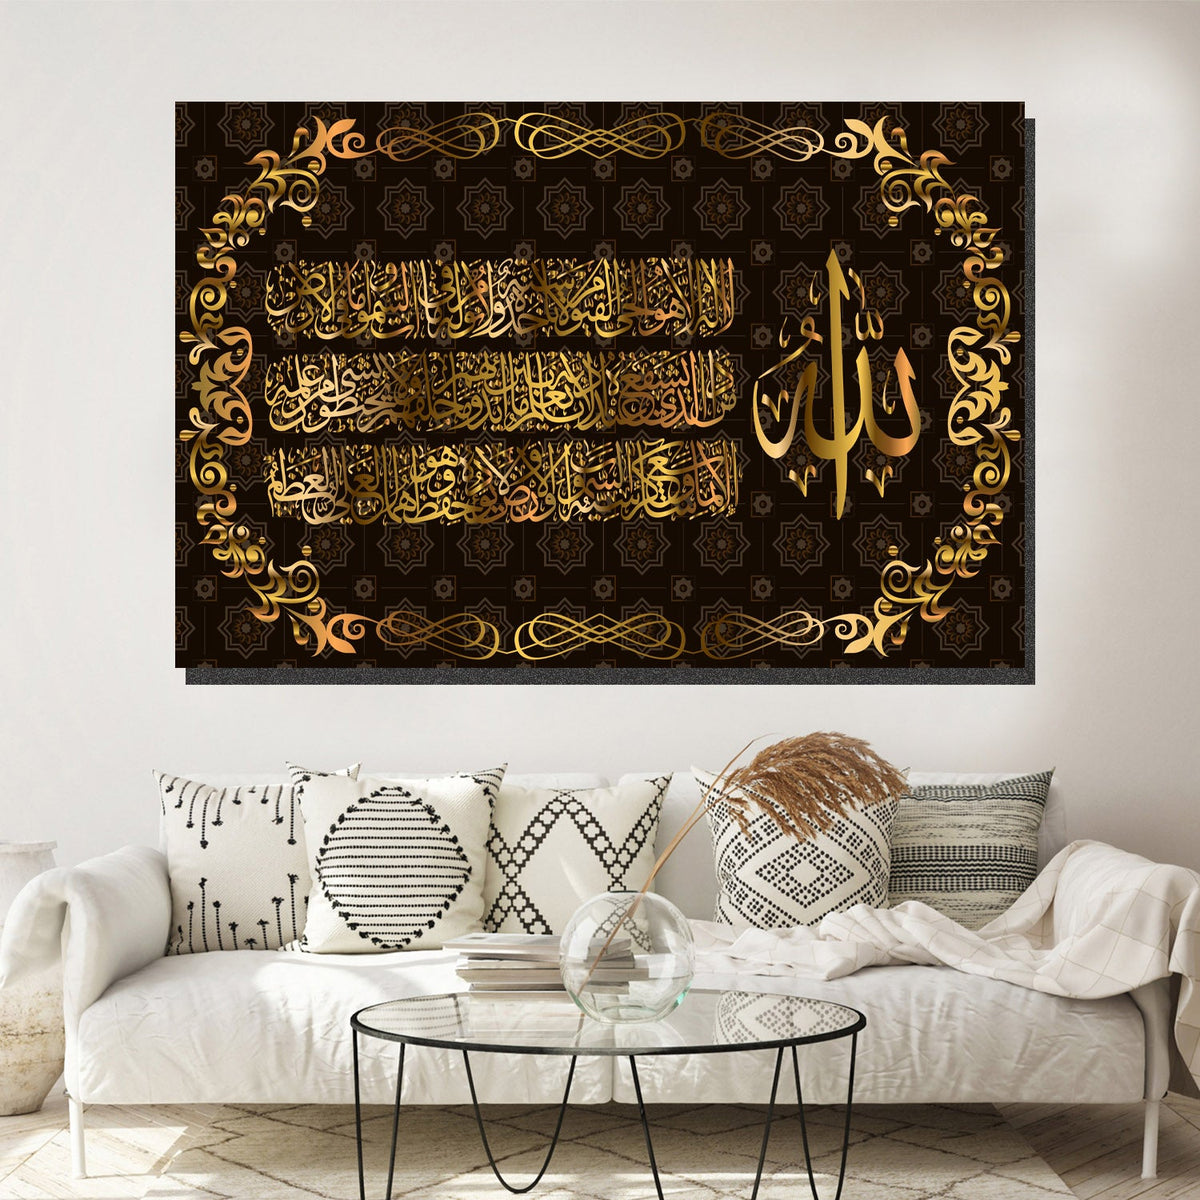 https://cdn.shopify.com/s/files/1/0387/9986/8044/products/ThroneofAllahCanvasArtprintStretched-1.jpg